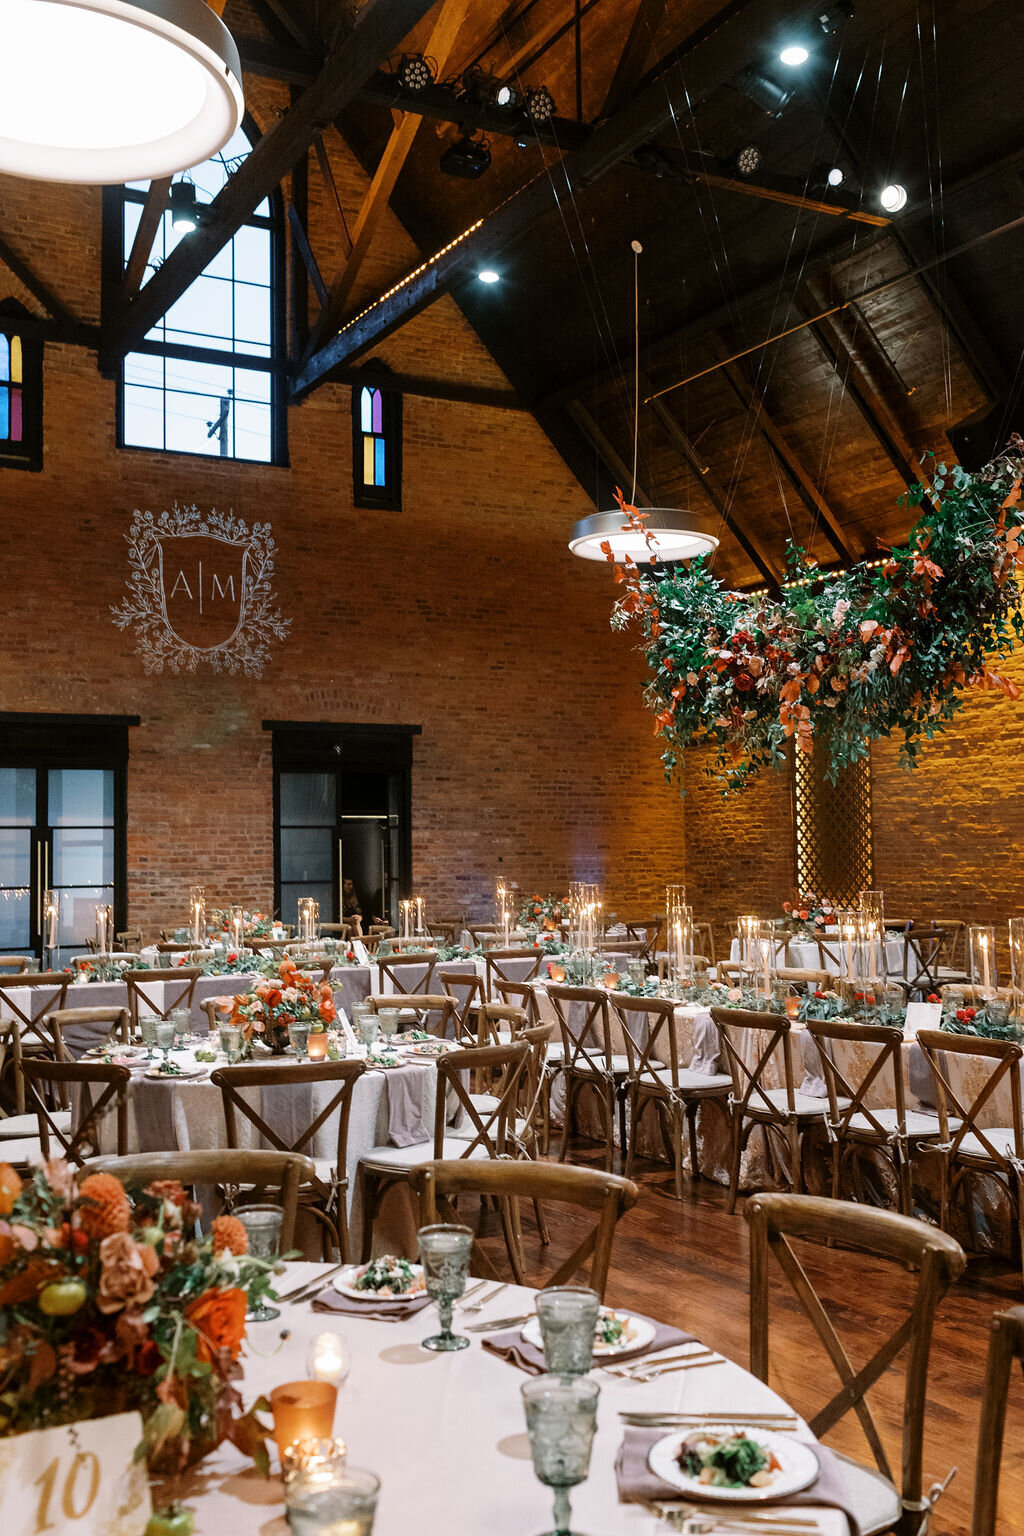 Gorgeous hanging installation of fall foliage, lush greenery and florals over the ceremony turned reception space enhancing the warm, natural atmosphere. Designed by Rosemary and Finch in Nashville, TN.